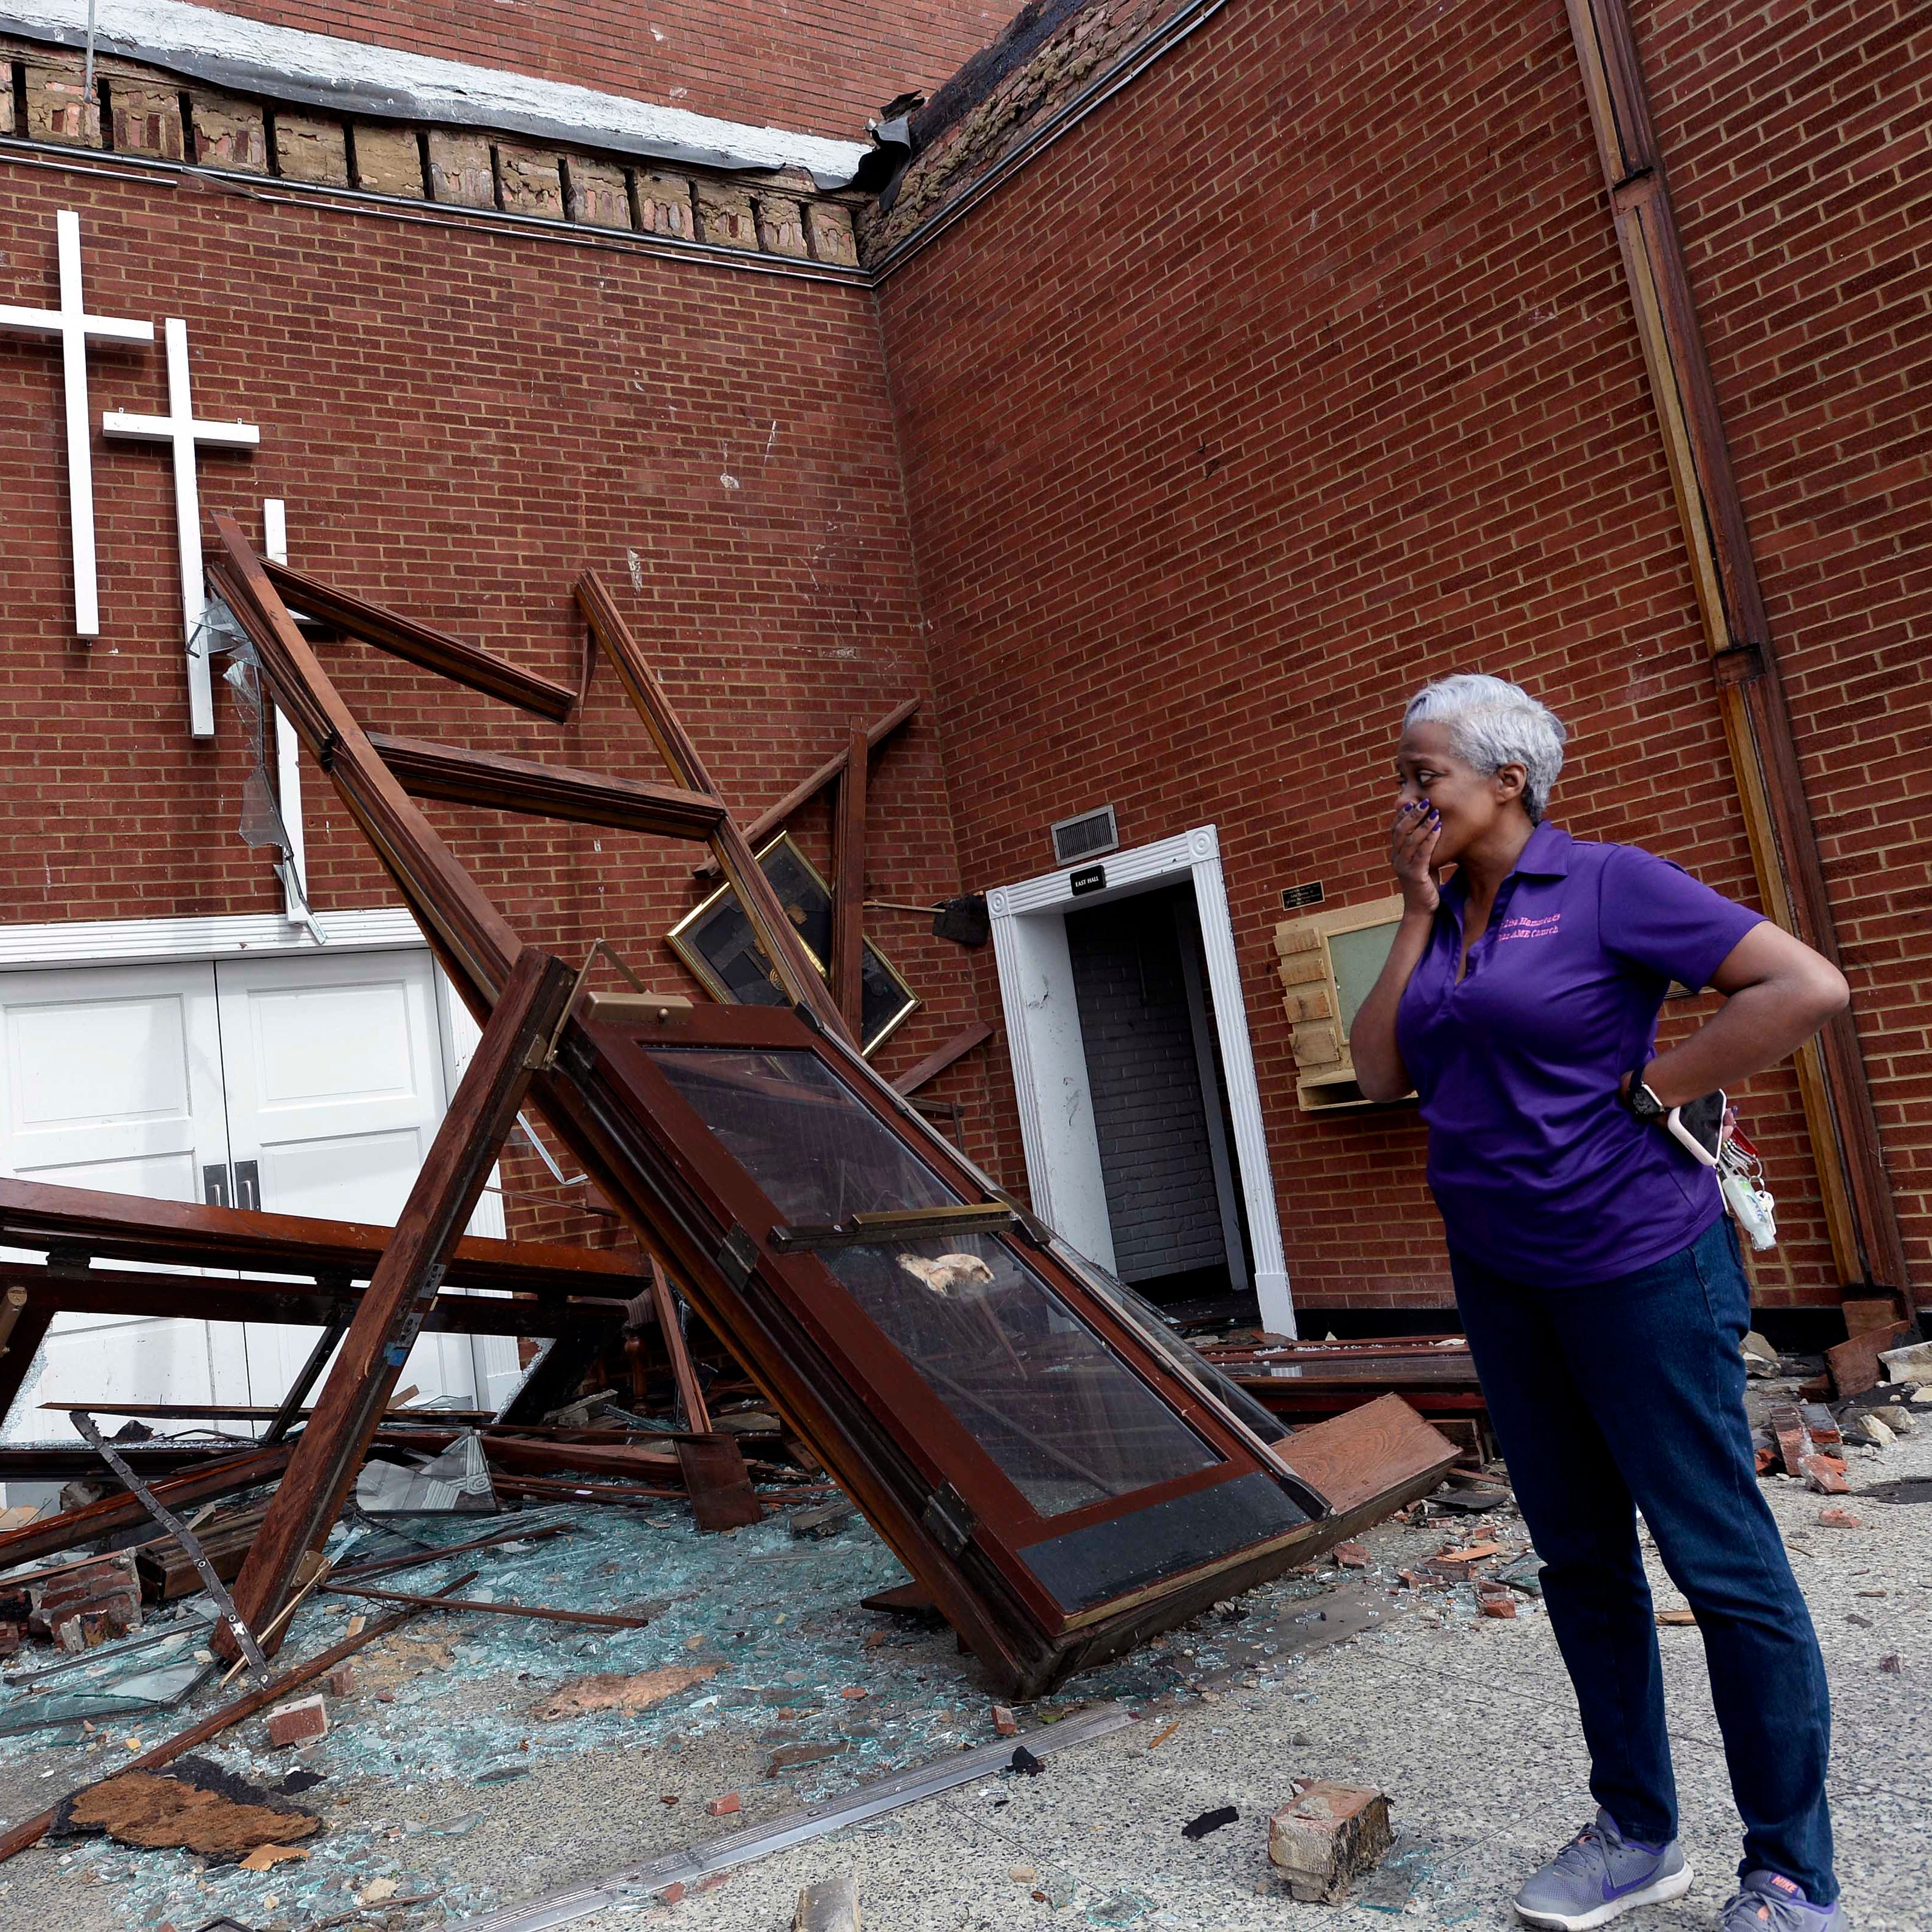 The Rev. Lisa Hammonds of the St. John A.M.E. Church fights back her emotions as she looks over the tornado damage to her church on Wednesday, March 4, 2020, in North Nashville, Tenn.